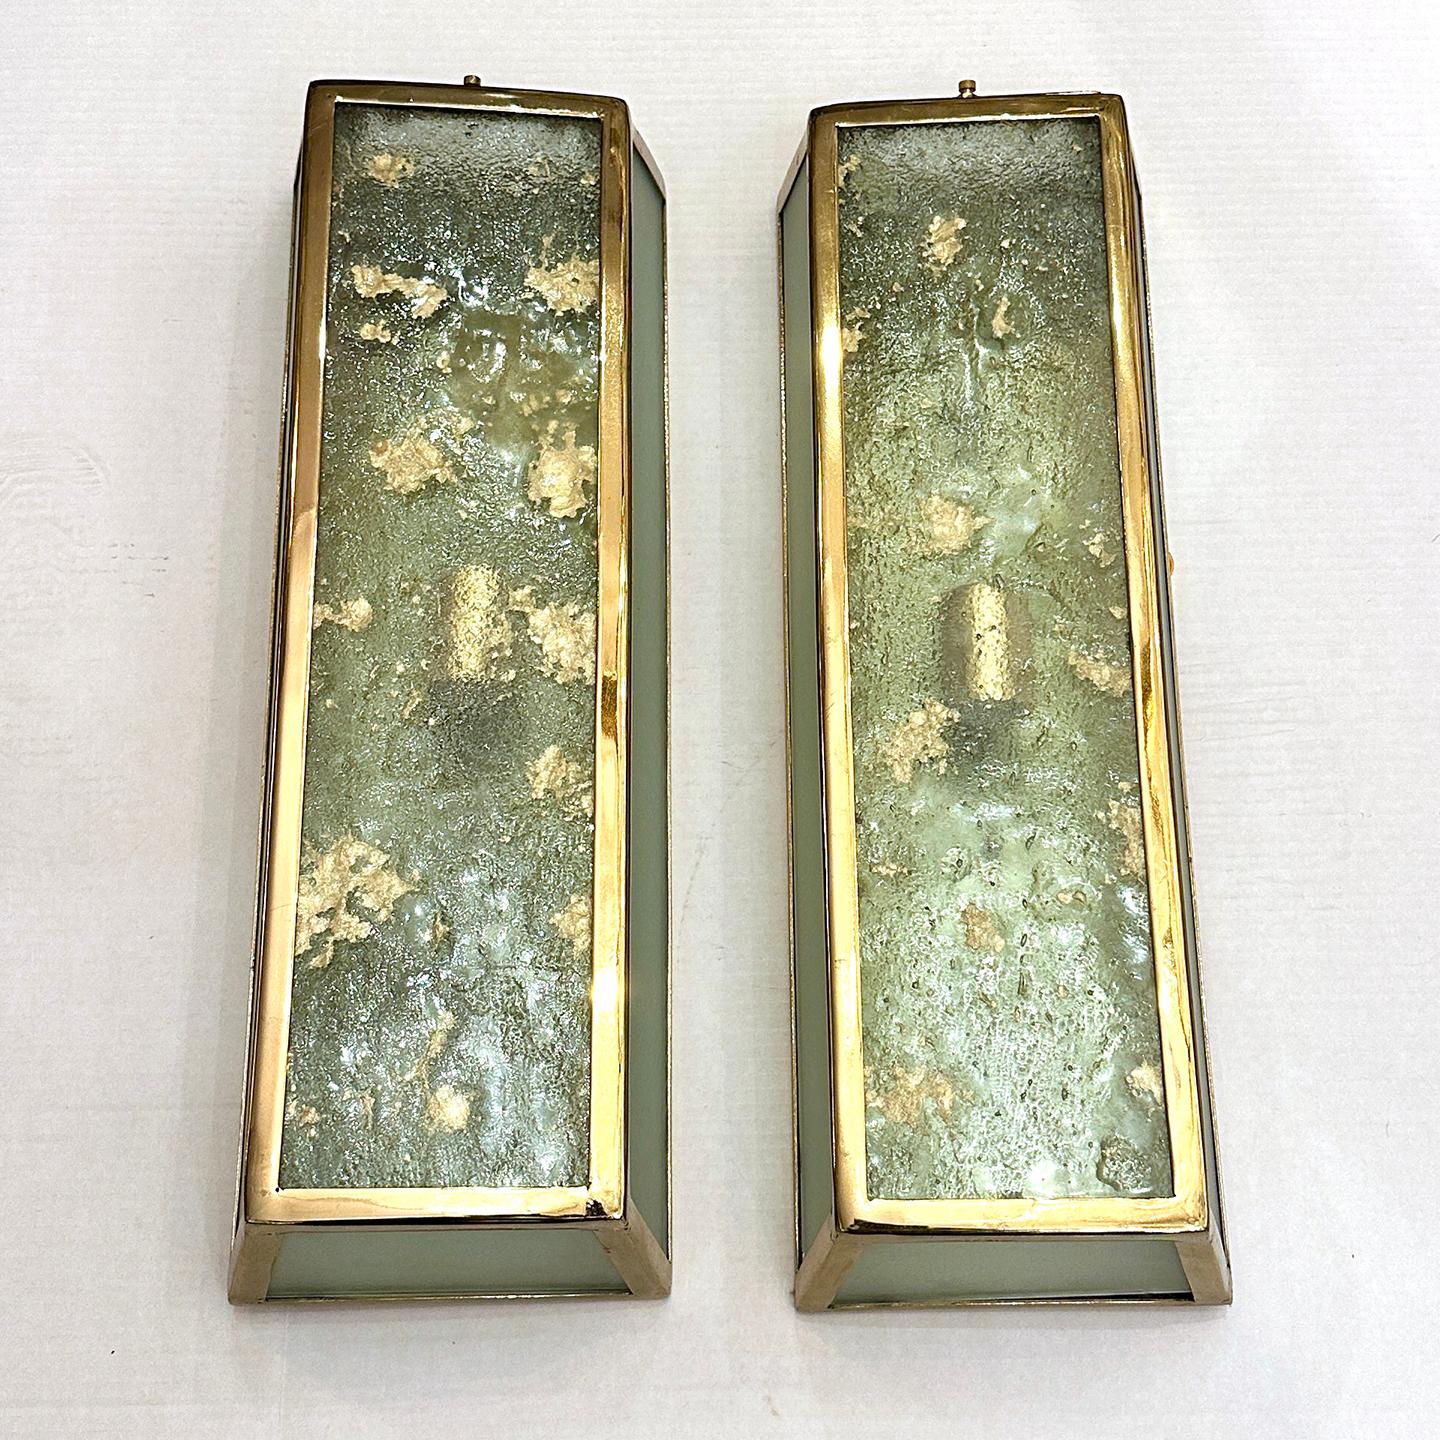 Pair of circa 1950s French gilt bronze flush-mount fixtures with art glass insets. 2 lights each. Sold individually.

Measurements:
Height: 12